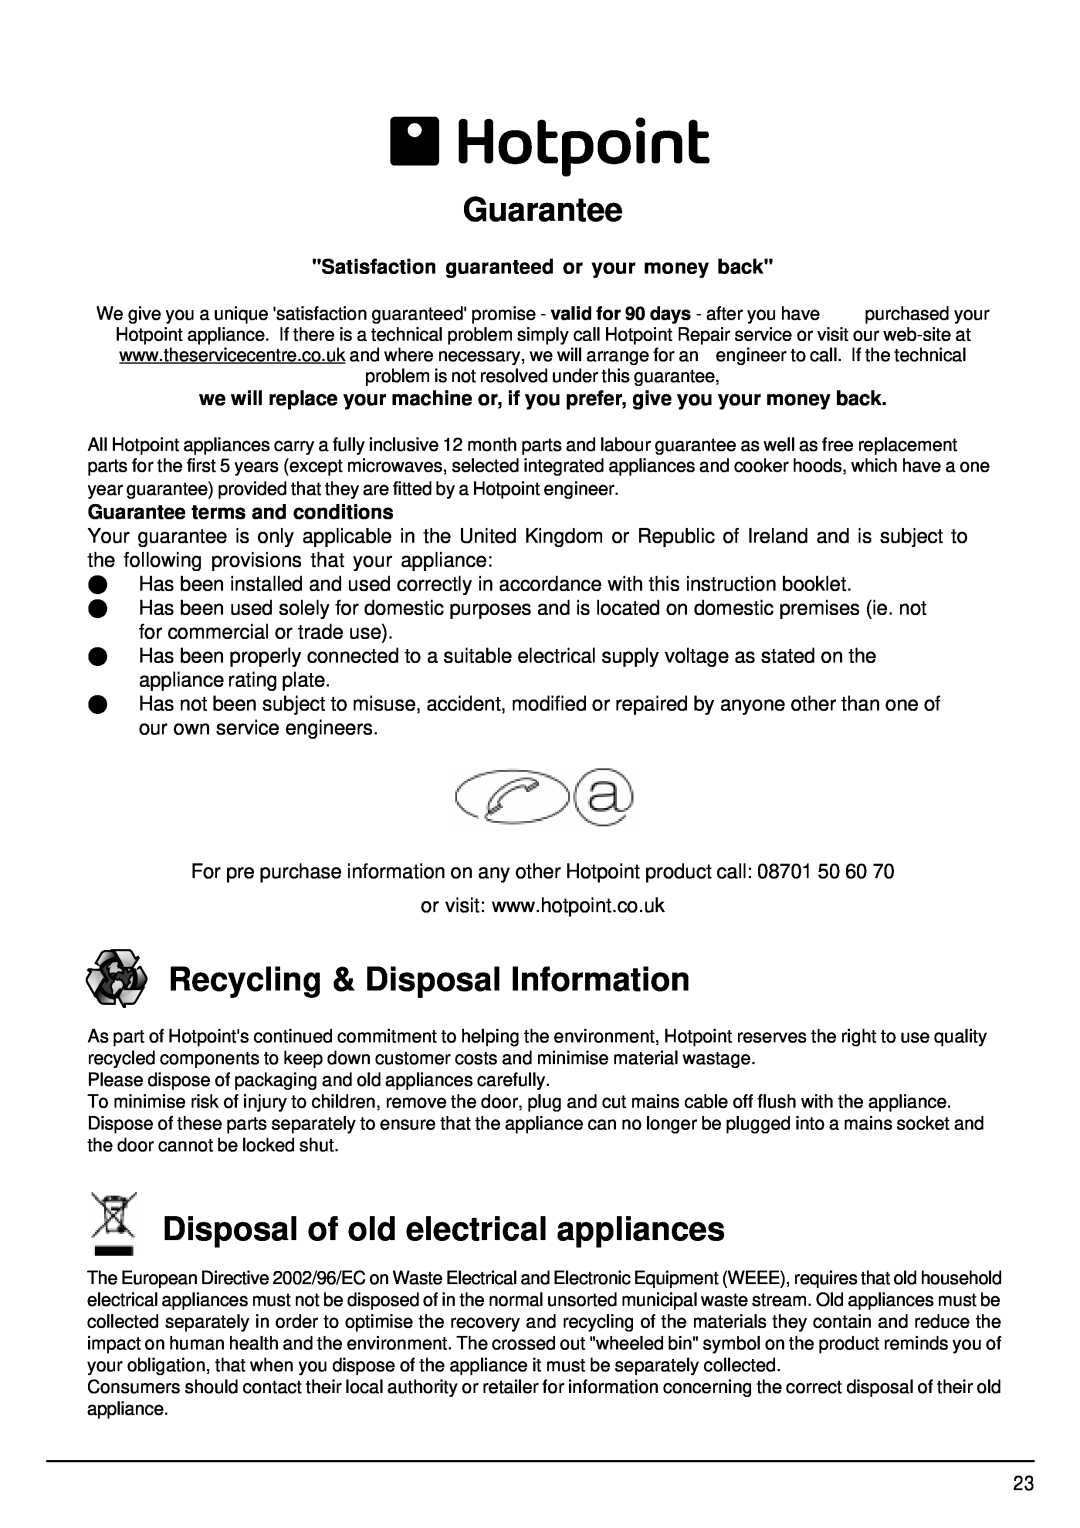 Hotpoint FDW85 manual Guarantee, Recycling & Disposal Information, Disposal of old electrical appliances 